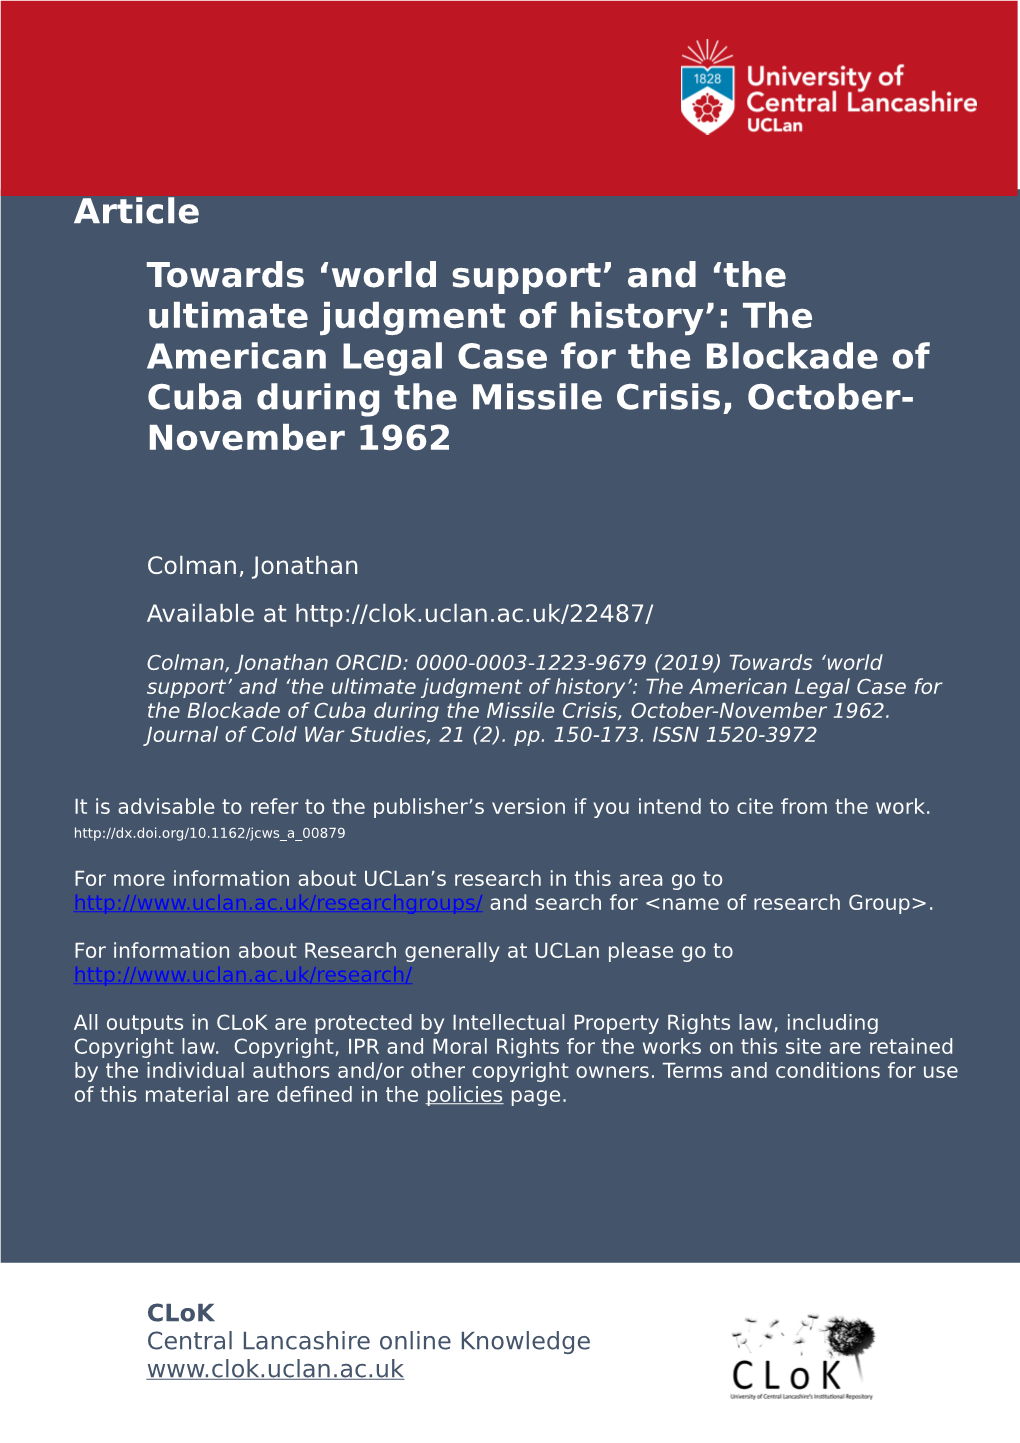 The American Legal Case for the Blockade of Cuba During the Missile Crisis, October- November 1962